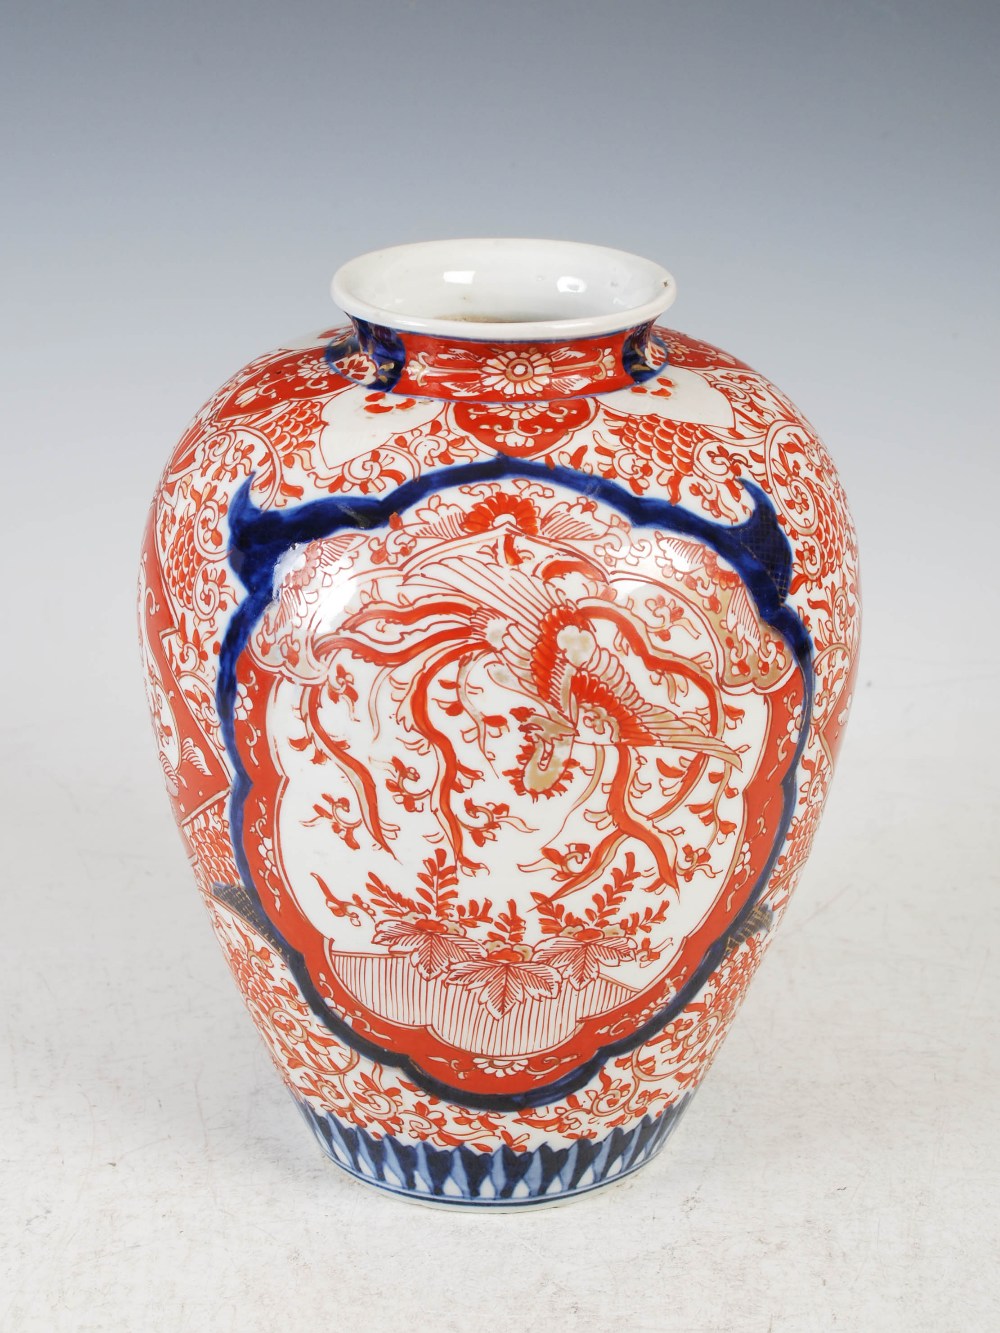 A Japanese Imari vase, late 19th/early 20th century, decorated with oval shaped panels enclosing